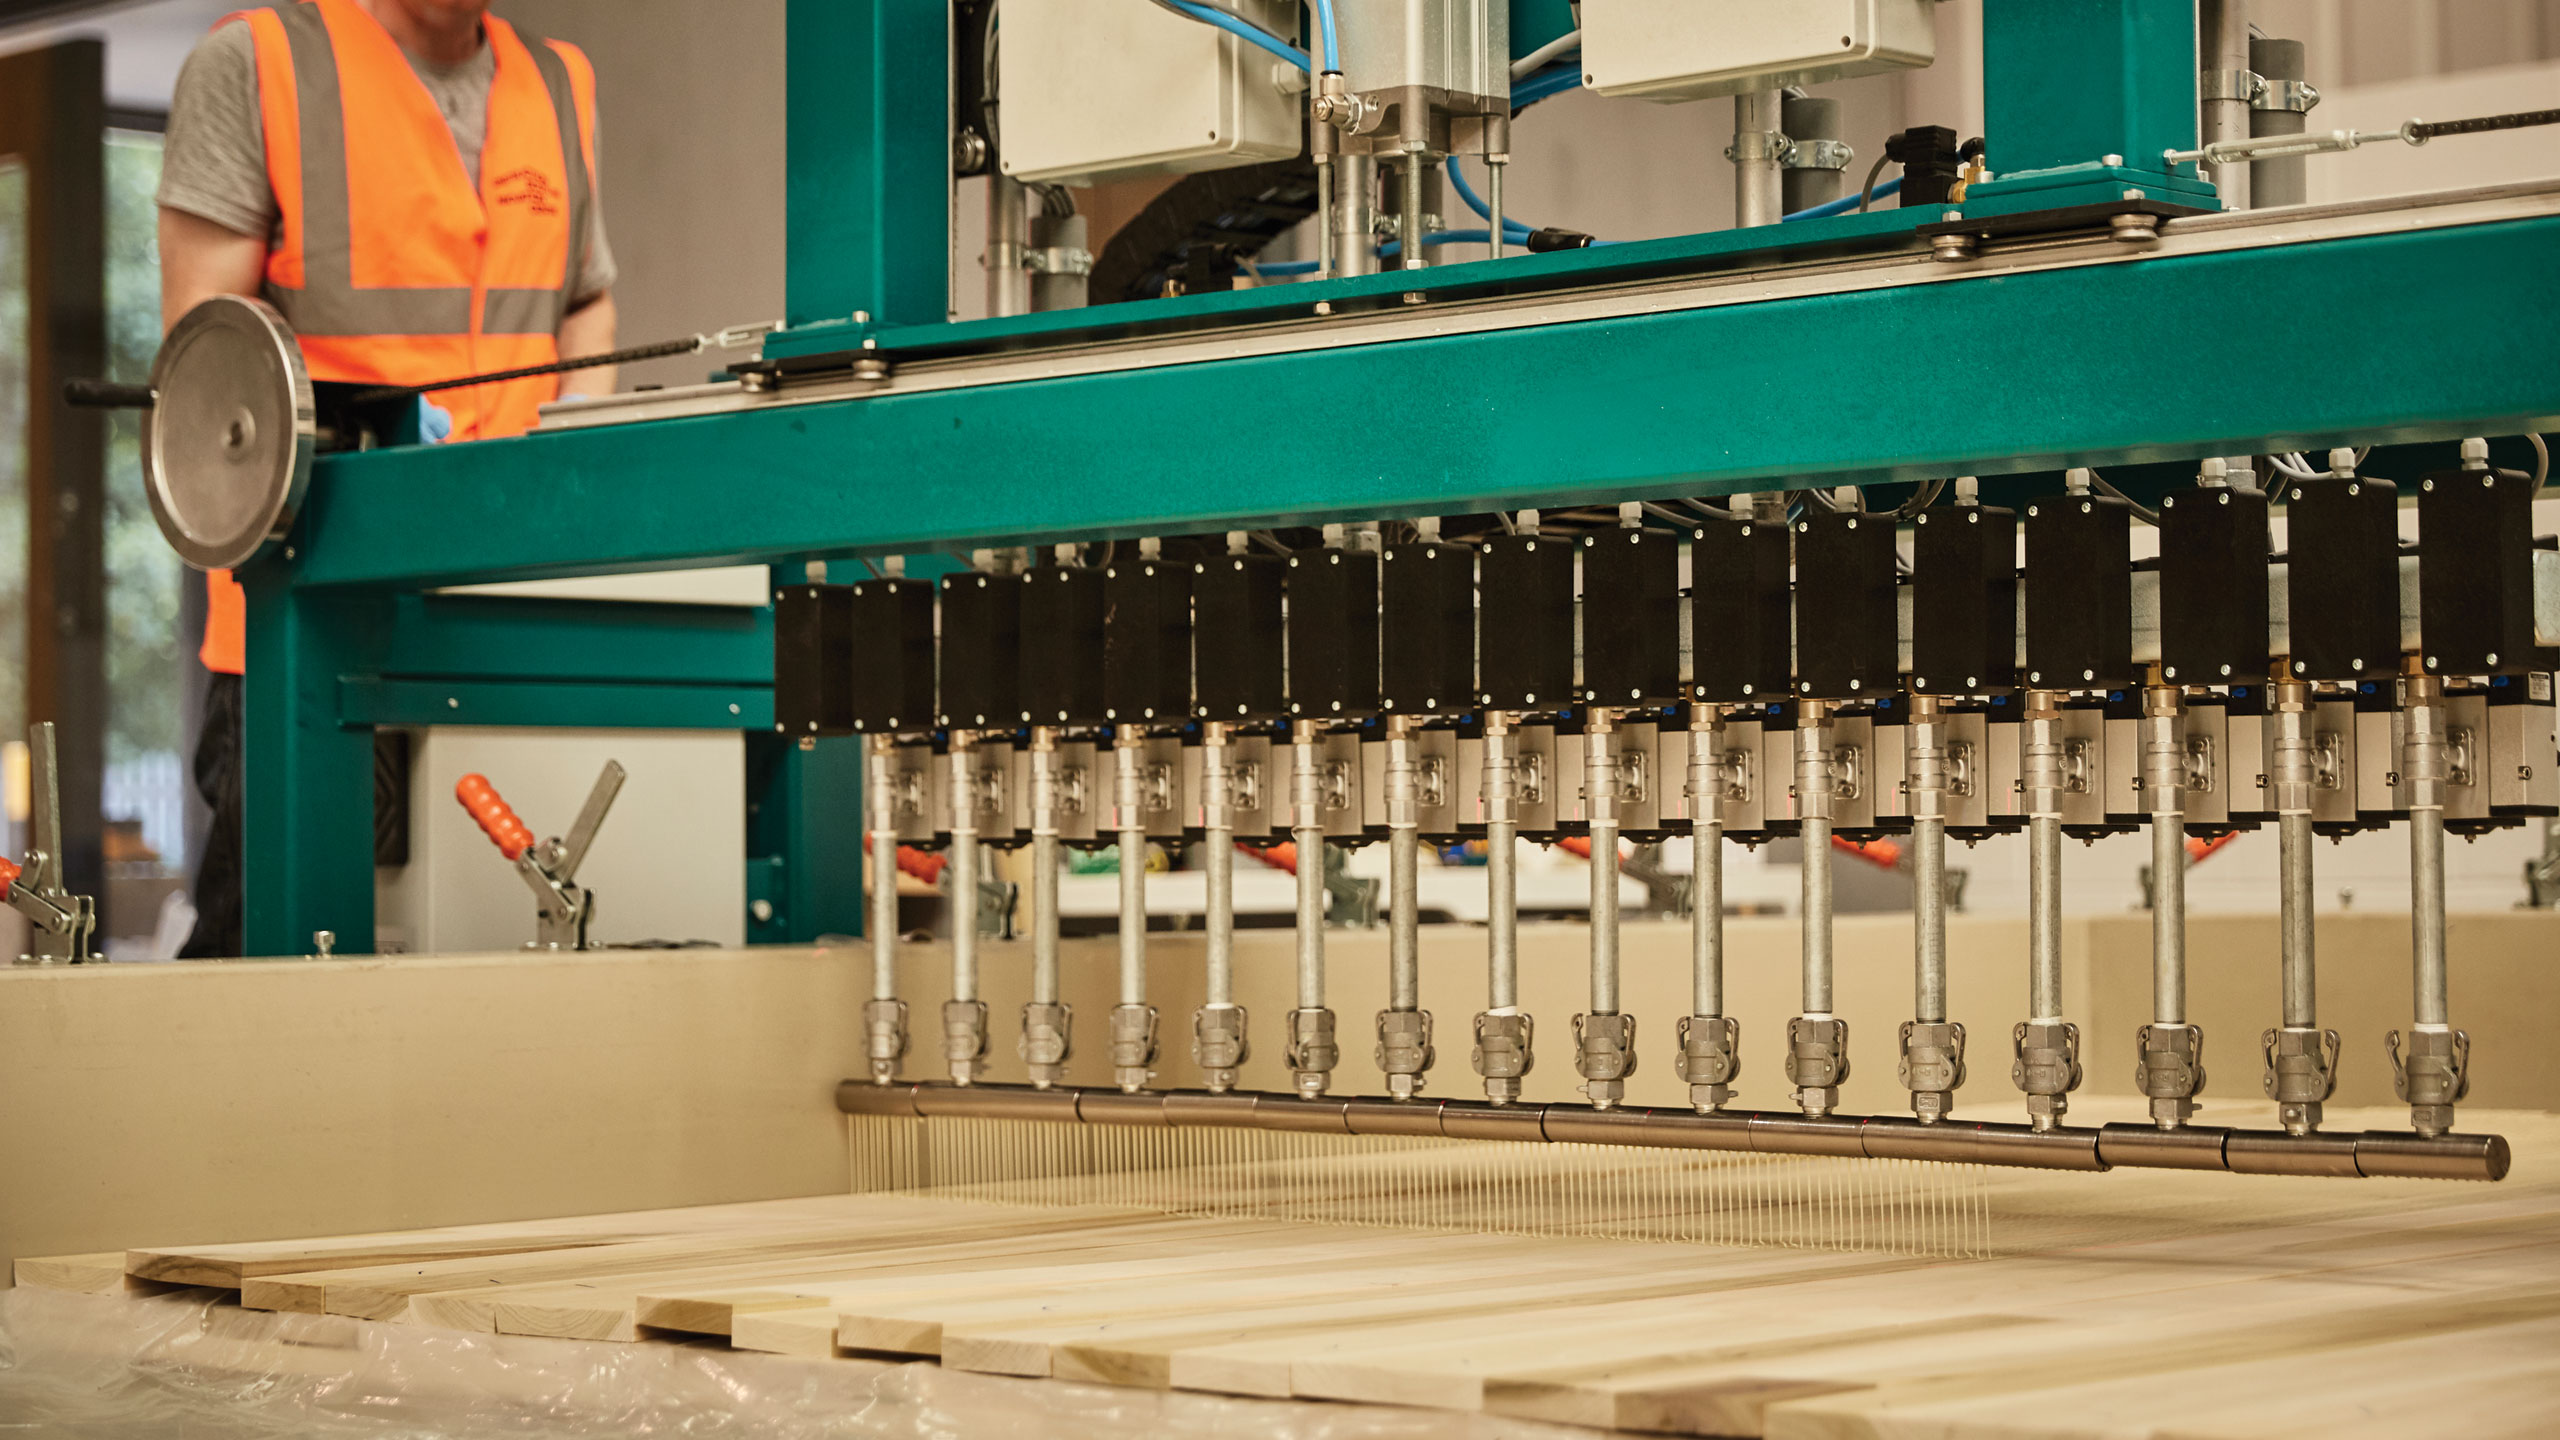 102 panels were pressed in Scotland by CSIC, making them the first UK-manufactured CLT panels.